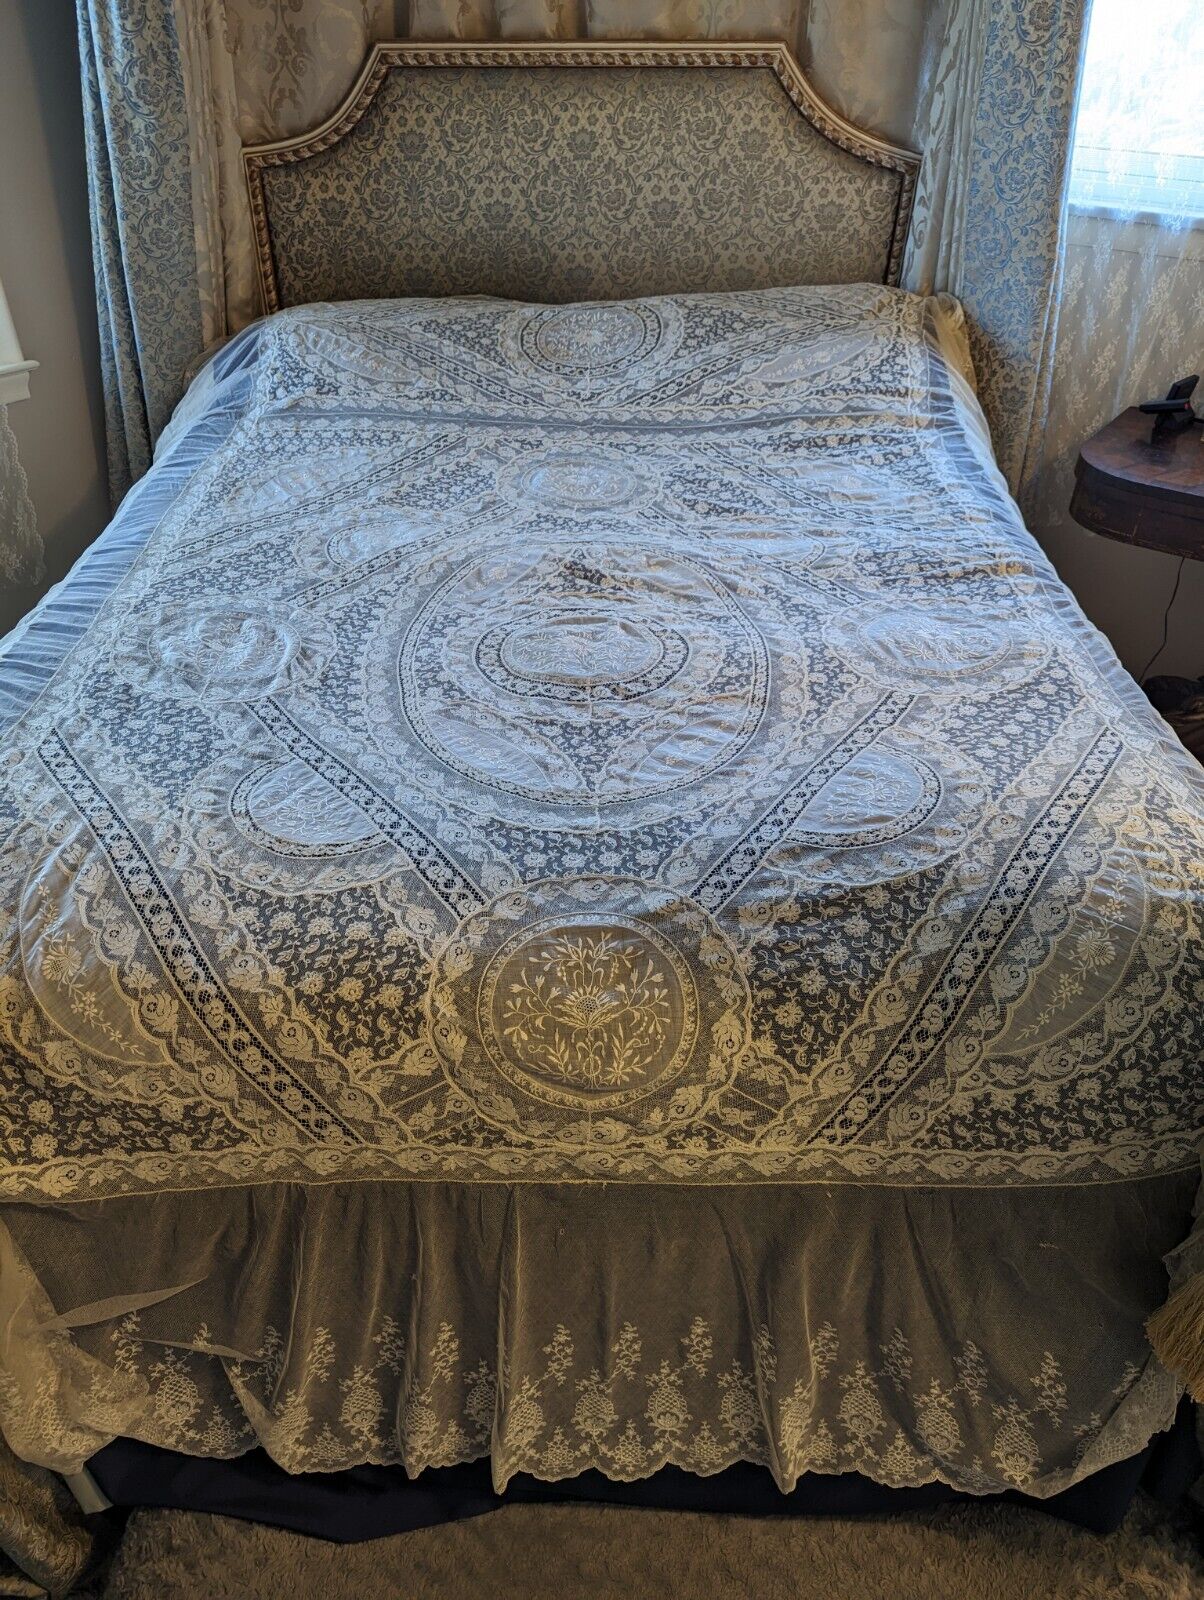 GORGEOUS Antique French Normandy Lace Bedspread Embroidery Tambour Lace 100 x 83